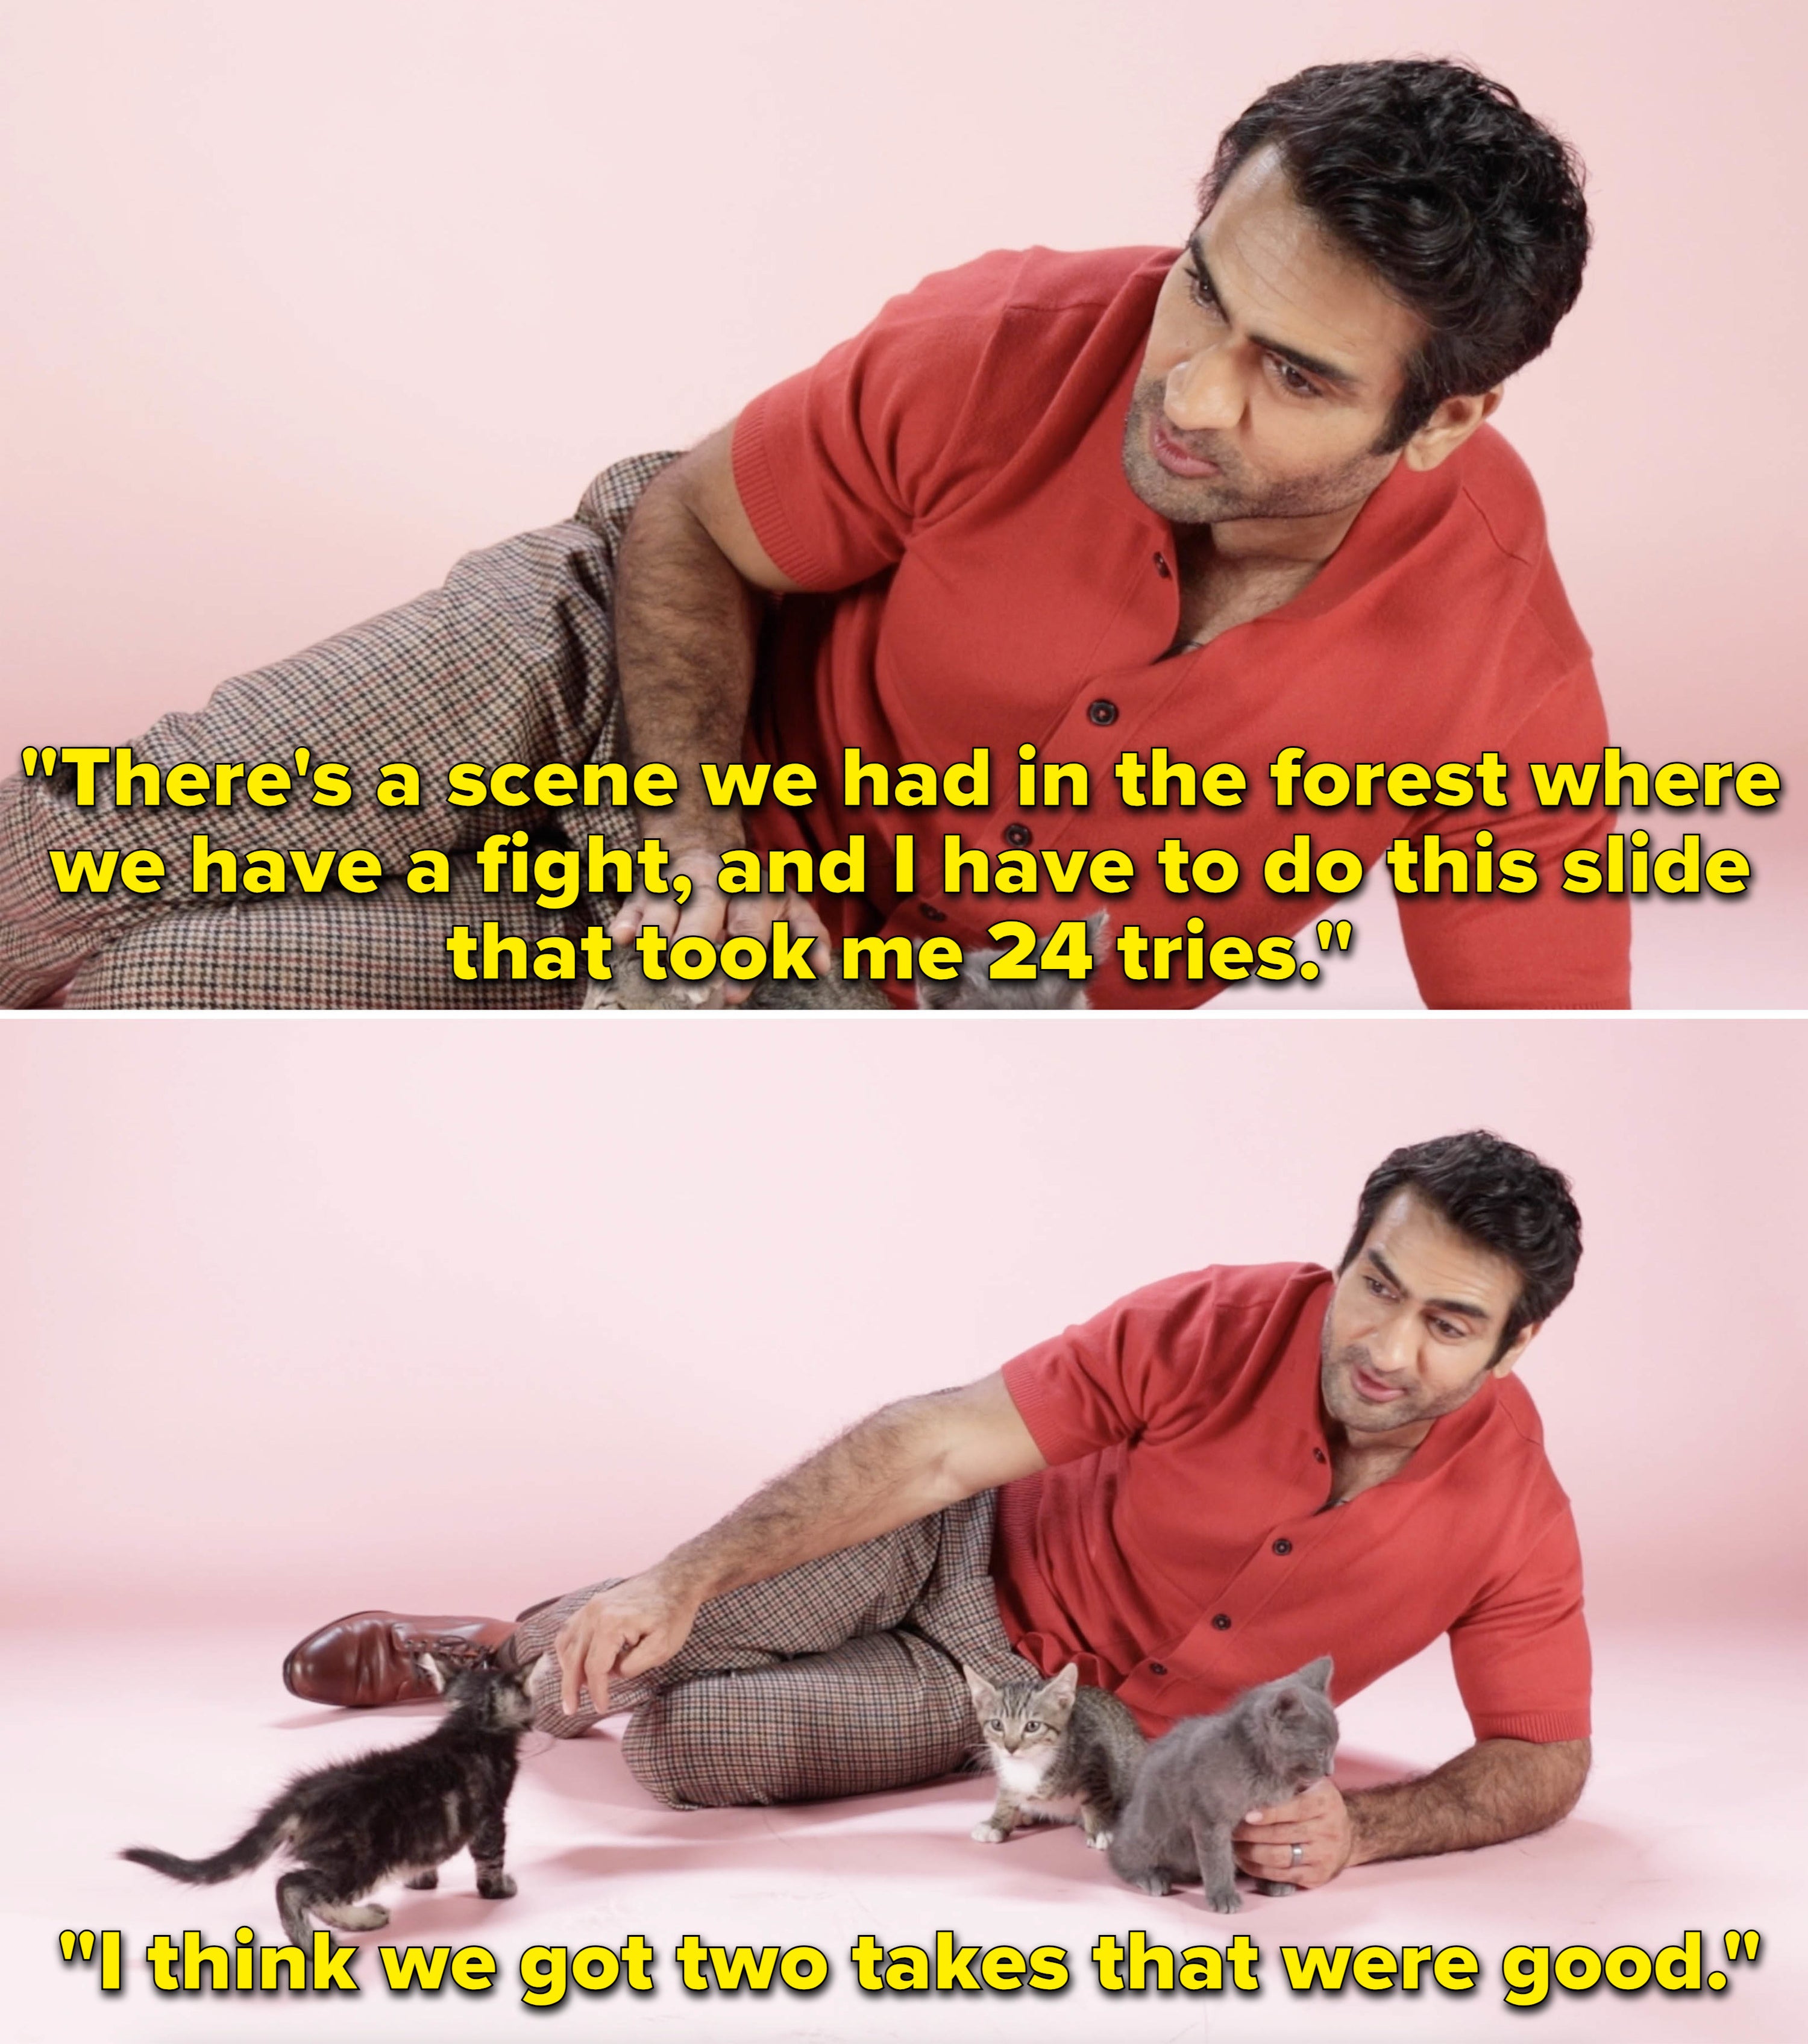 Kumail with kittens saying &quot;There&#x27;s a scene we had in the forest where we have a fight, and I have to do this slid that took me 24 tries; I think we got two takes that were good&quot;